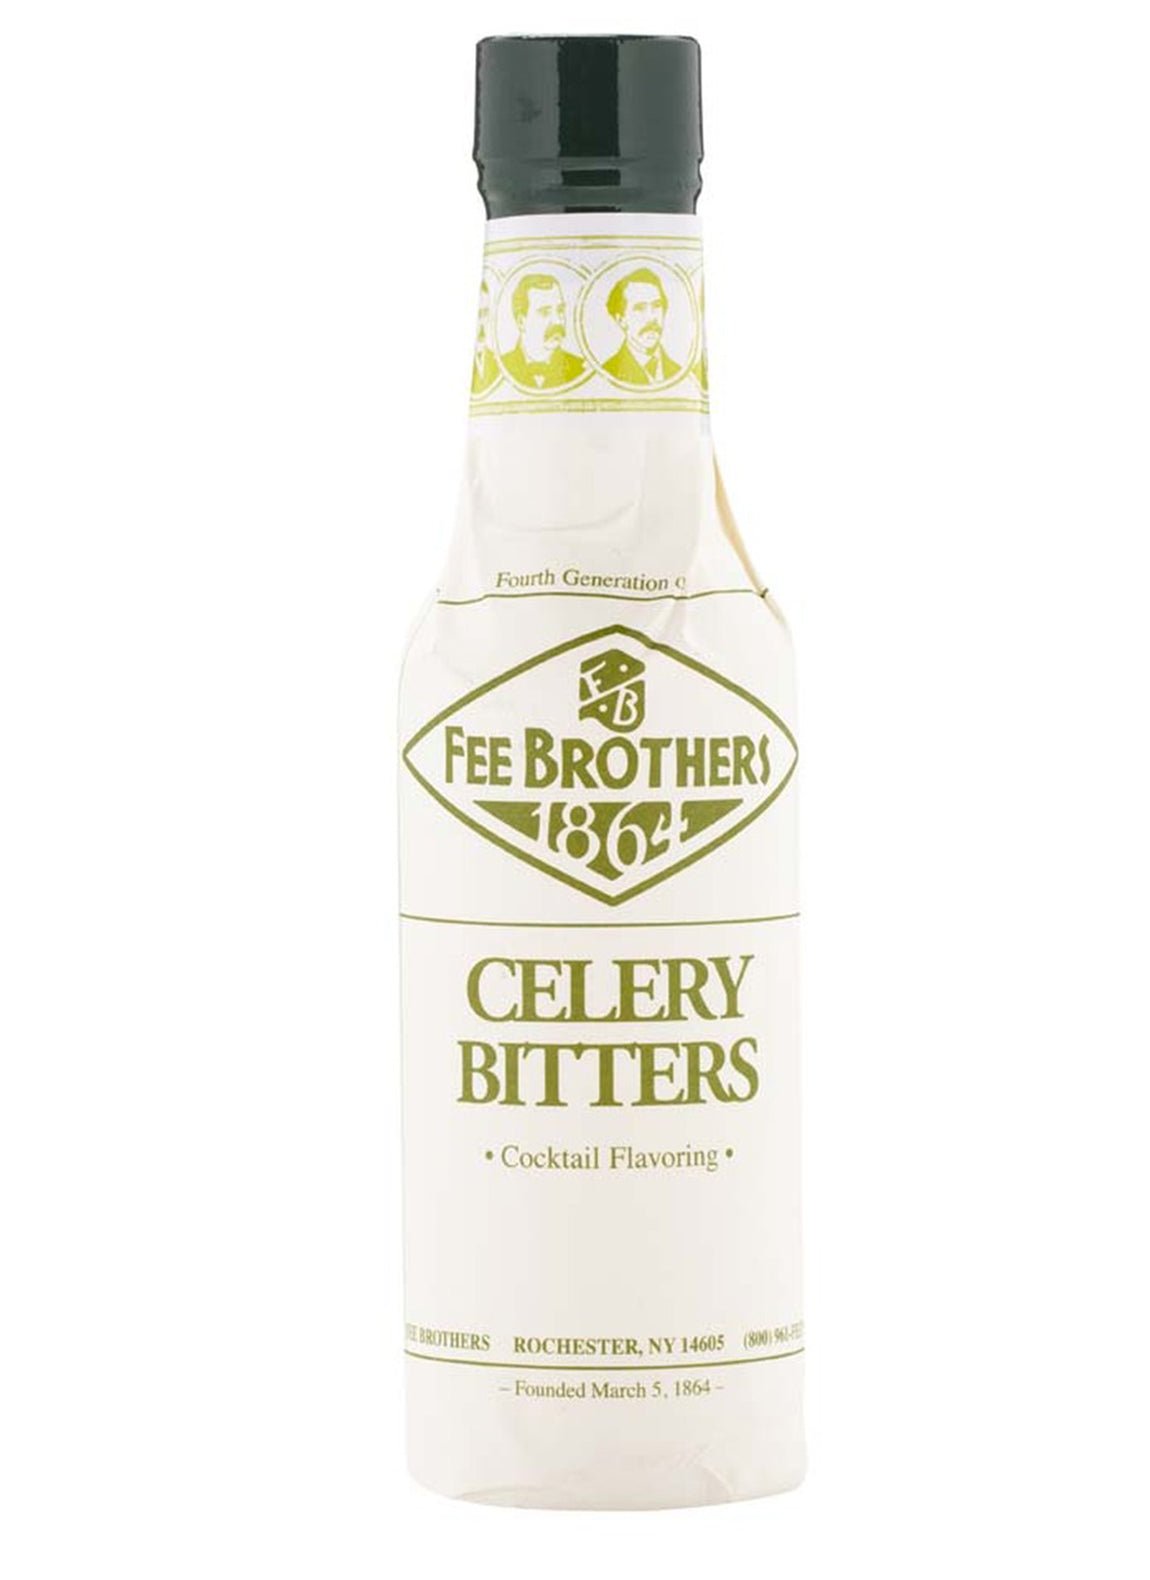 Fee Brothers Celery Bitters - Bitters - Liquor Wine Cave